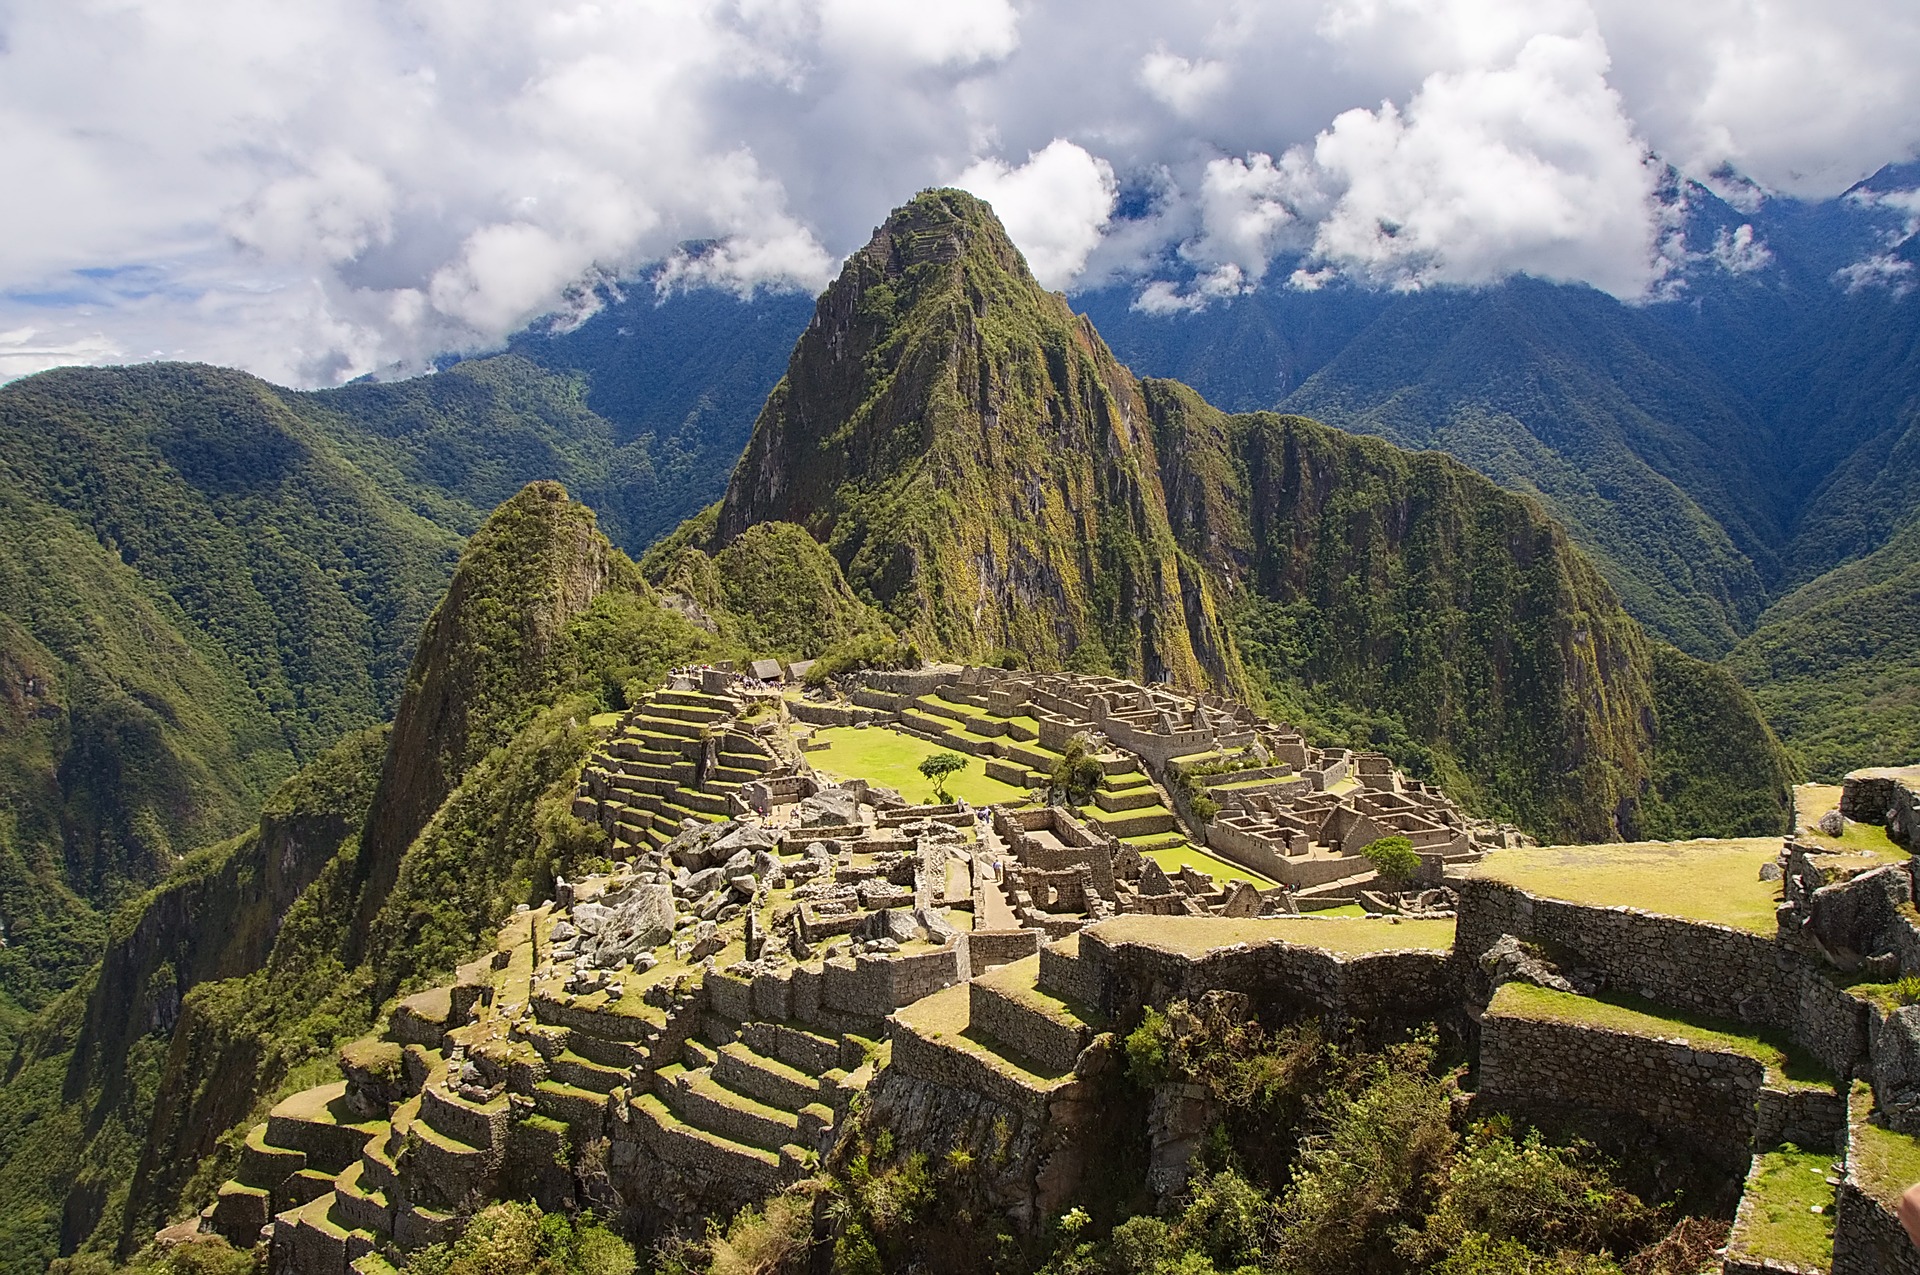 Machu Picchu is getting an airport. Will it ruin the ruins 